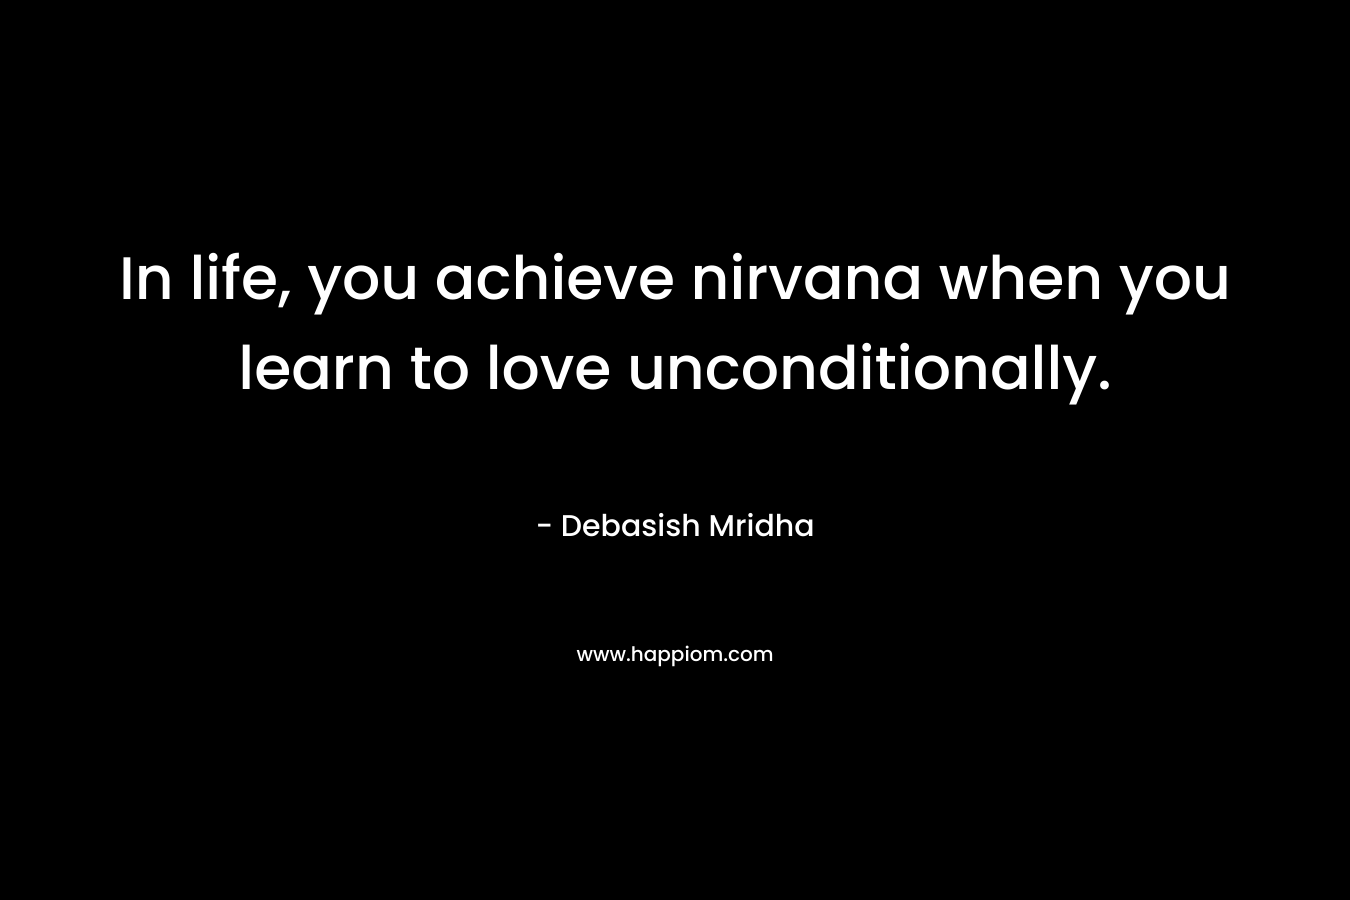 In life, you achieve nirvana when you learn to love unconditionally. – Debasish Mridha